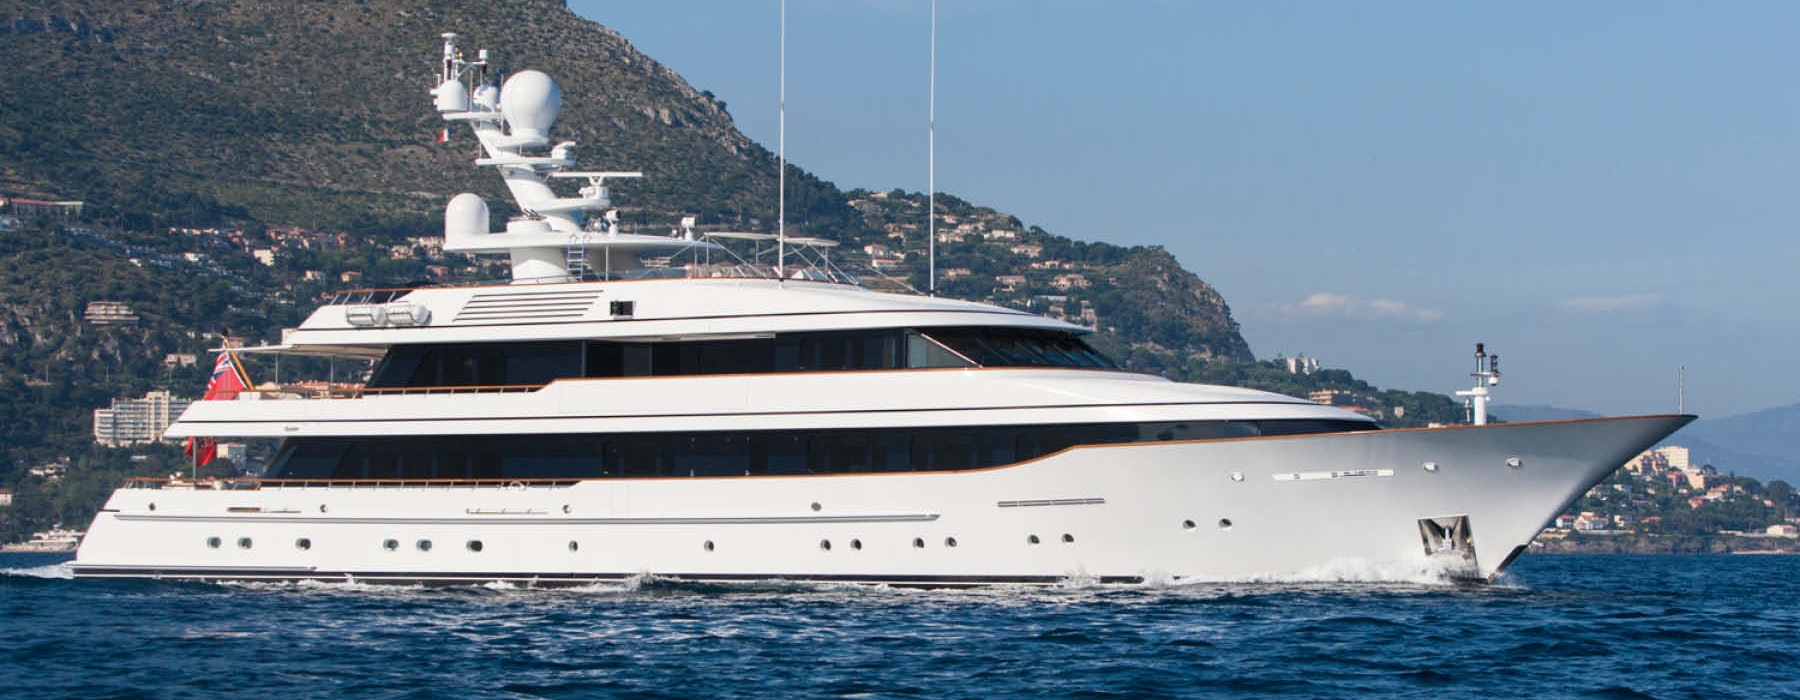 Feadship Luxury Yacht MADSUMMER For Sale